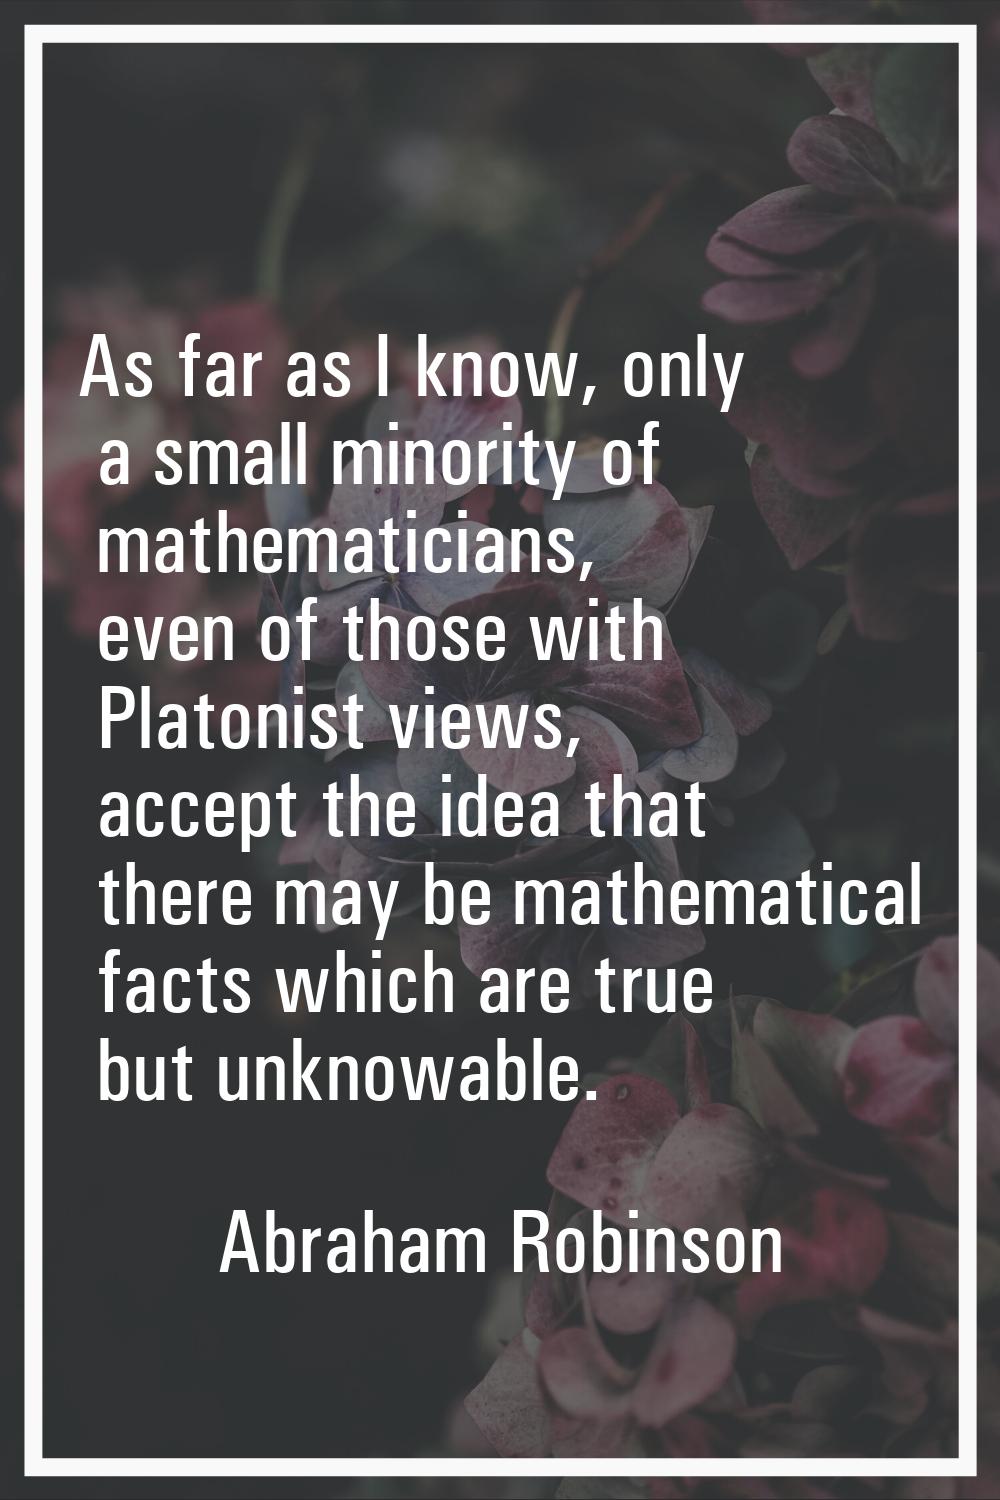 As far as I know, only a small minority of mathematicians, even of those with Platonist views, acce